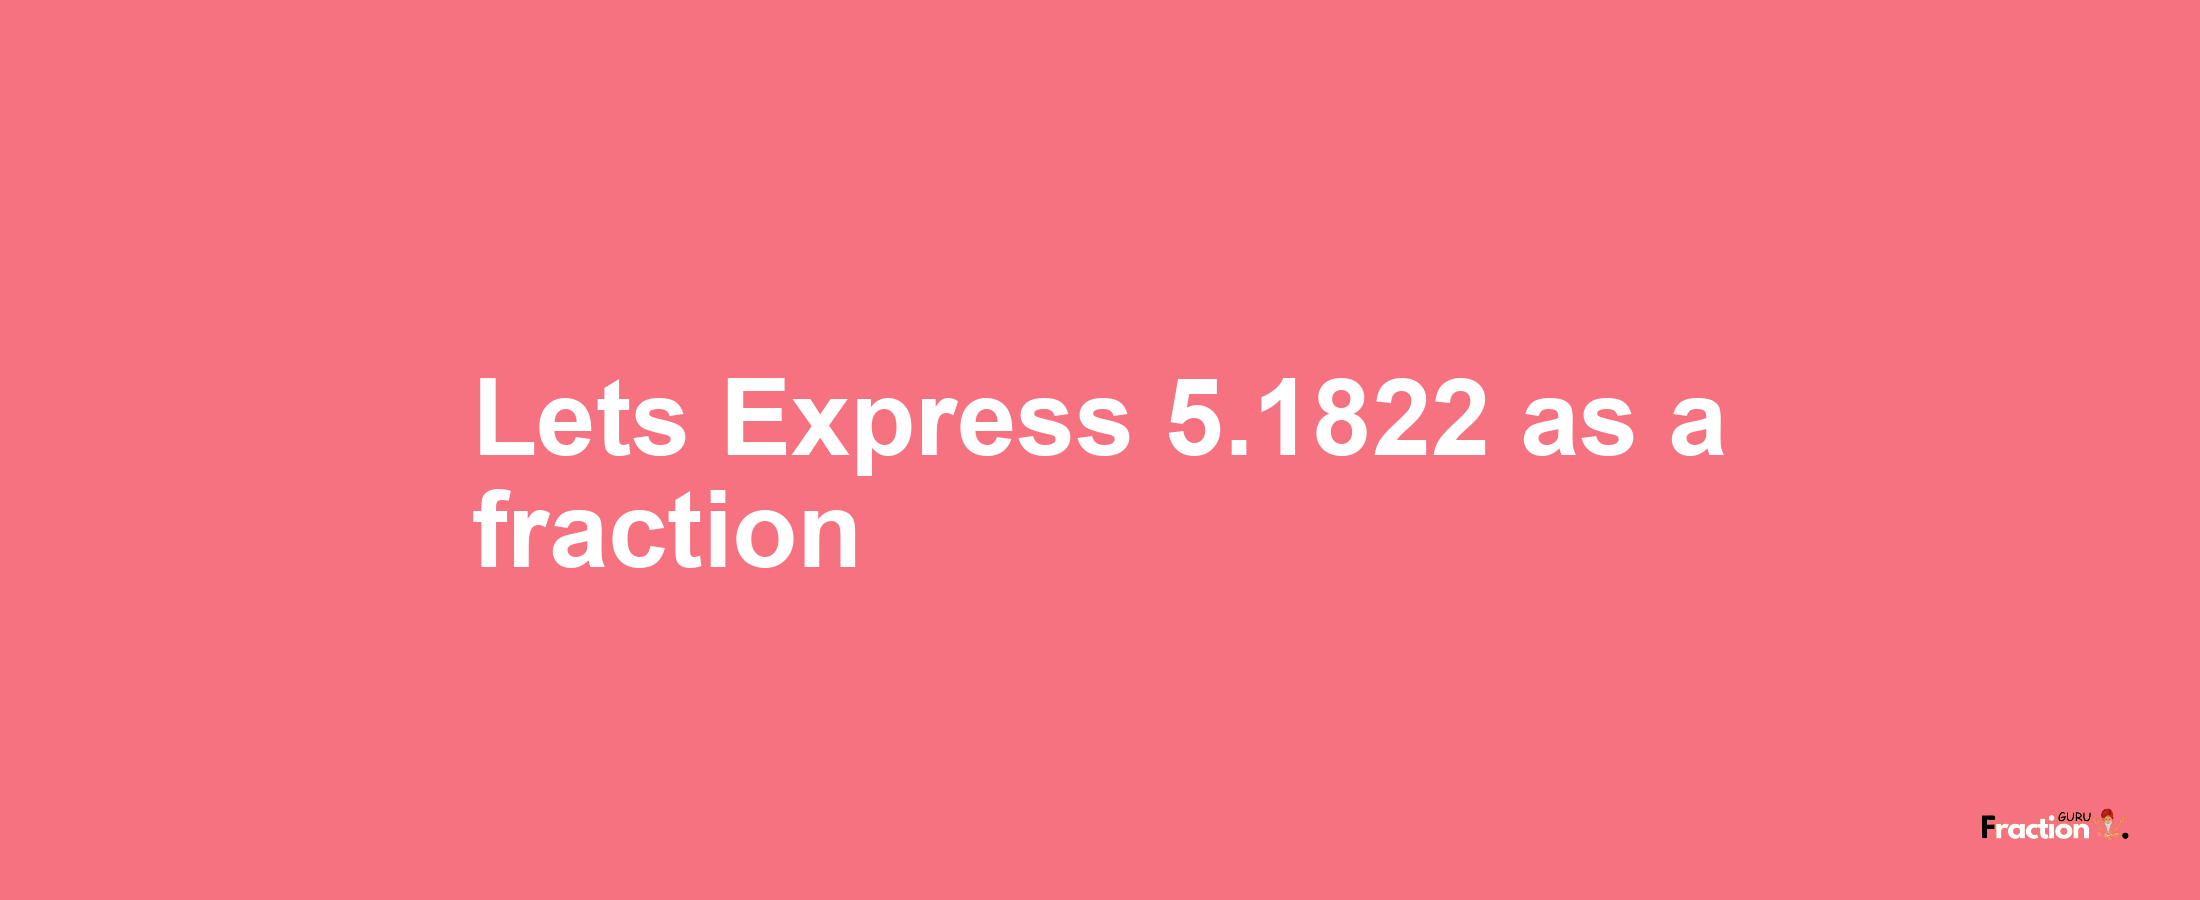 Lets Express 5.1822 as afraction